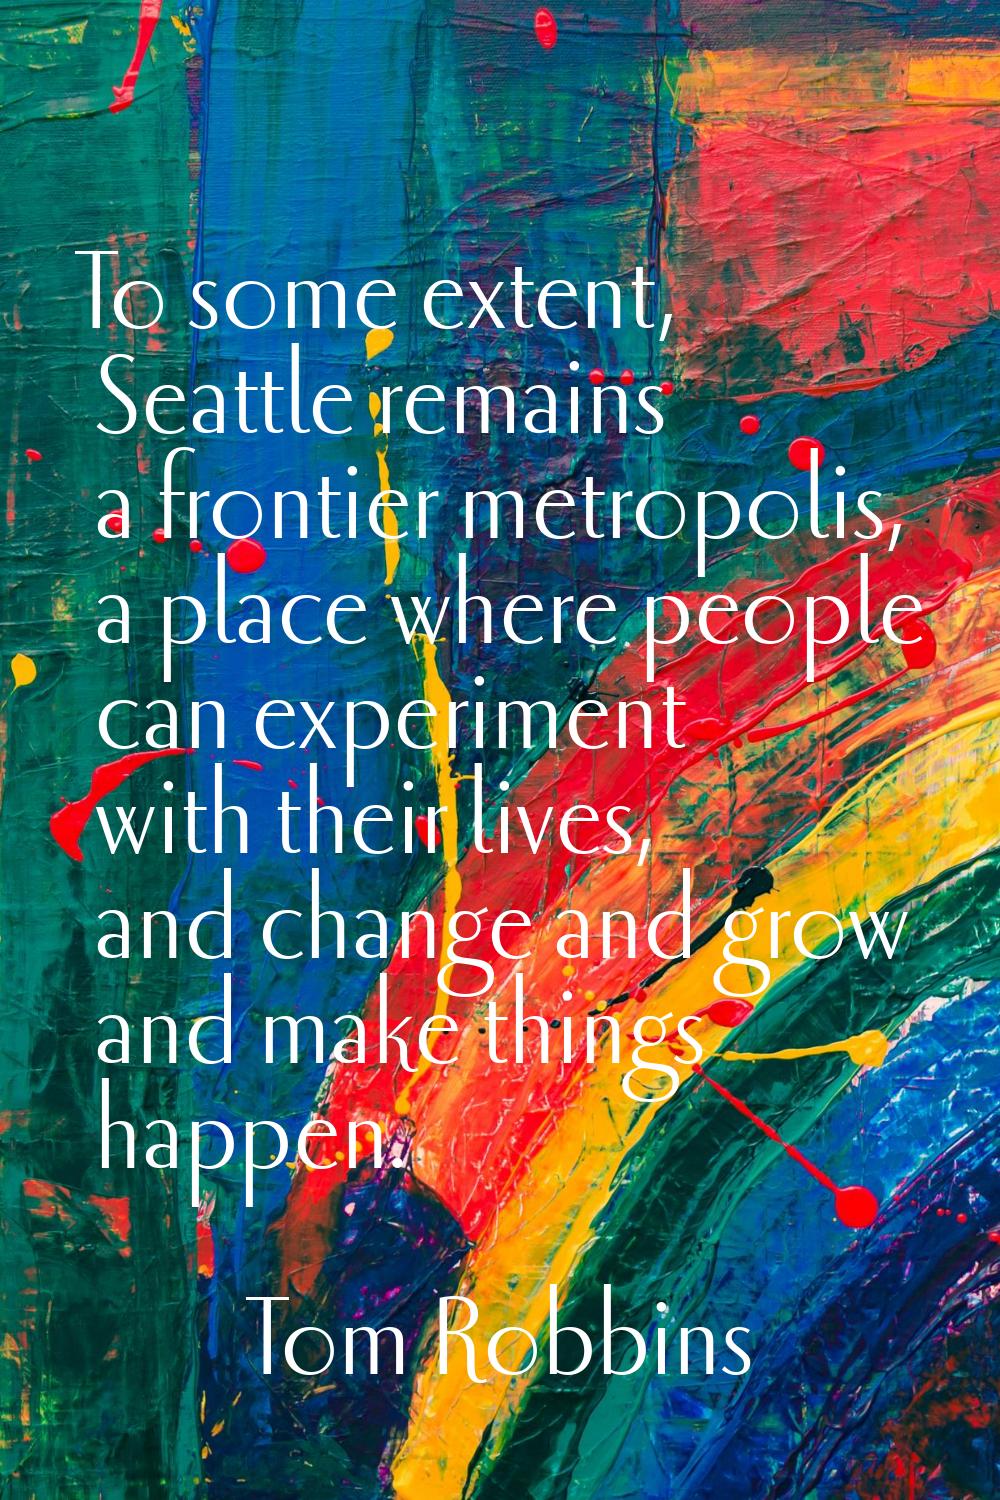 To some extent, Seattle remains a frontier metropolis, a place where people can experiment with the